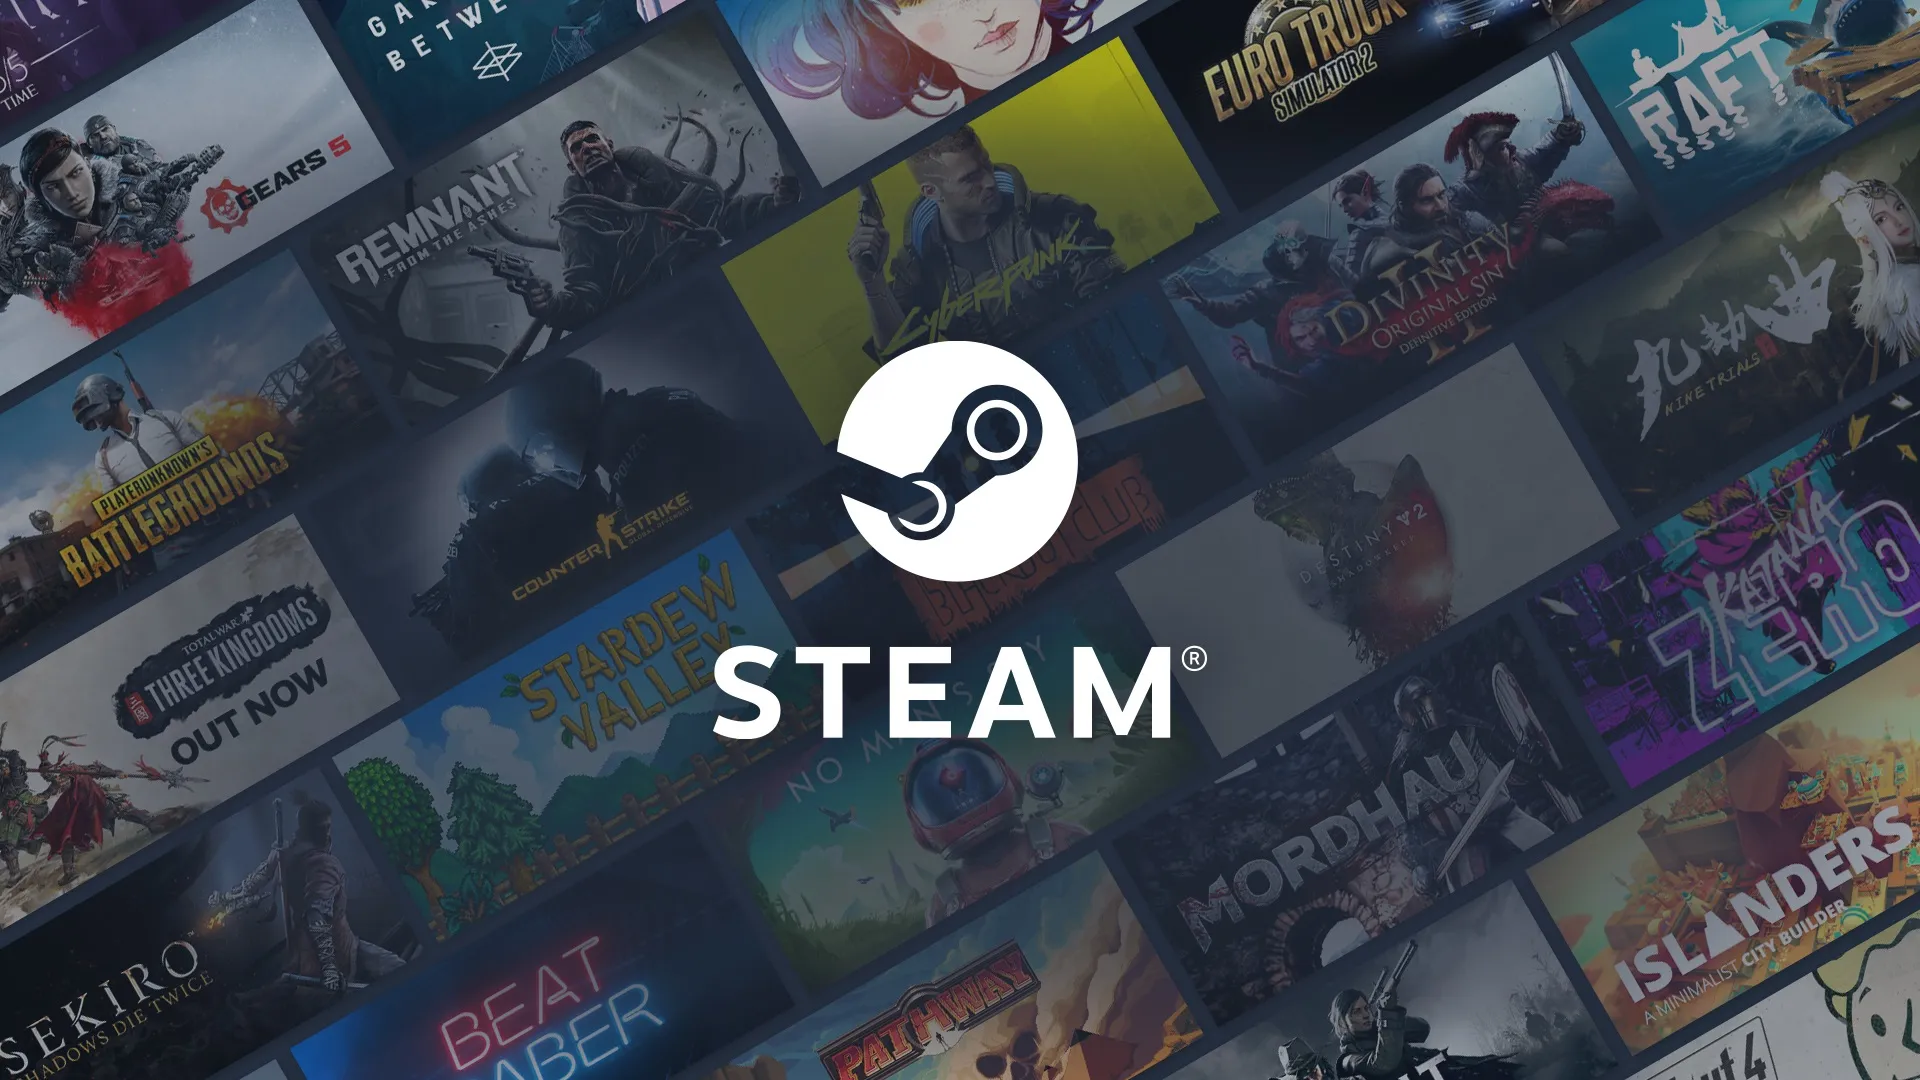 How To Download Steam Workshop Mods for Non-Steam Games - Full